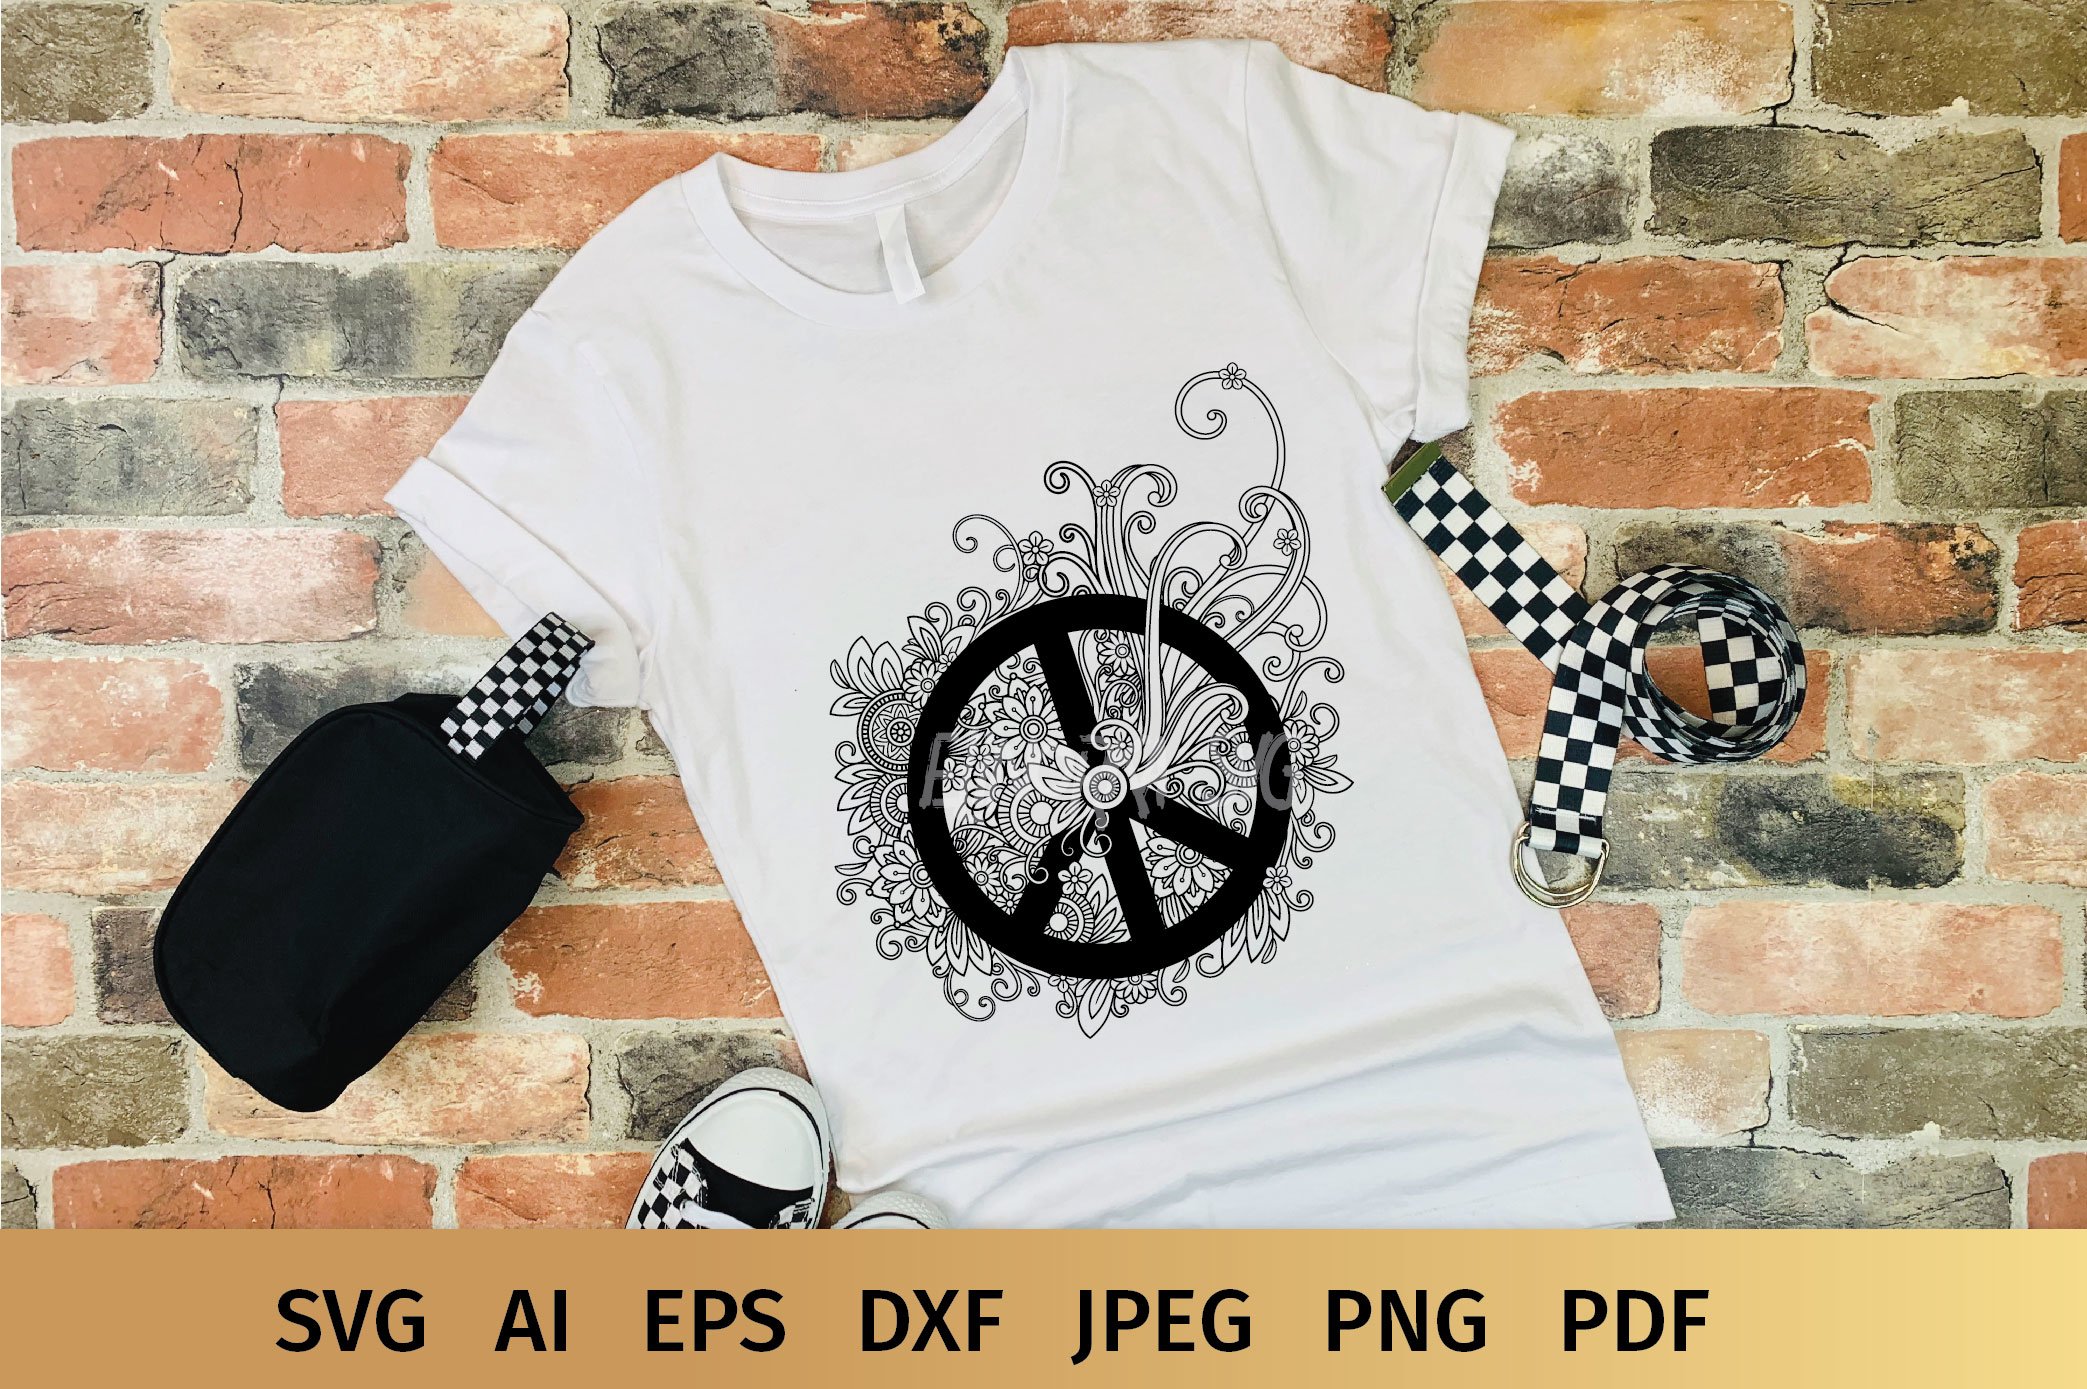 Floral peace symbol on the white t-shirt.